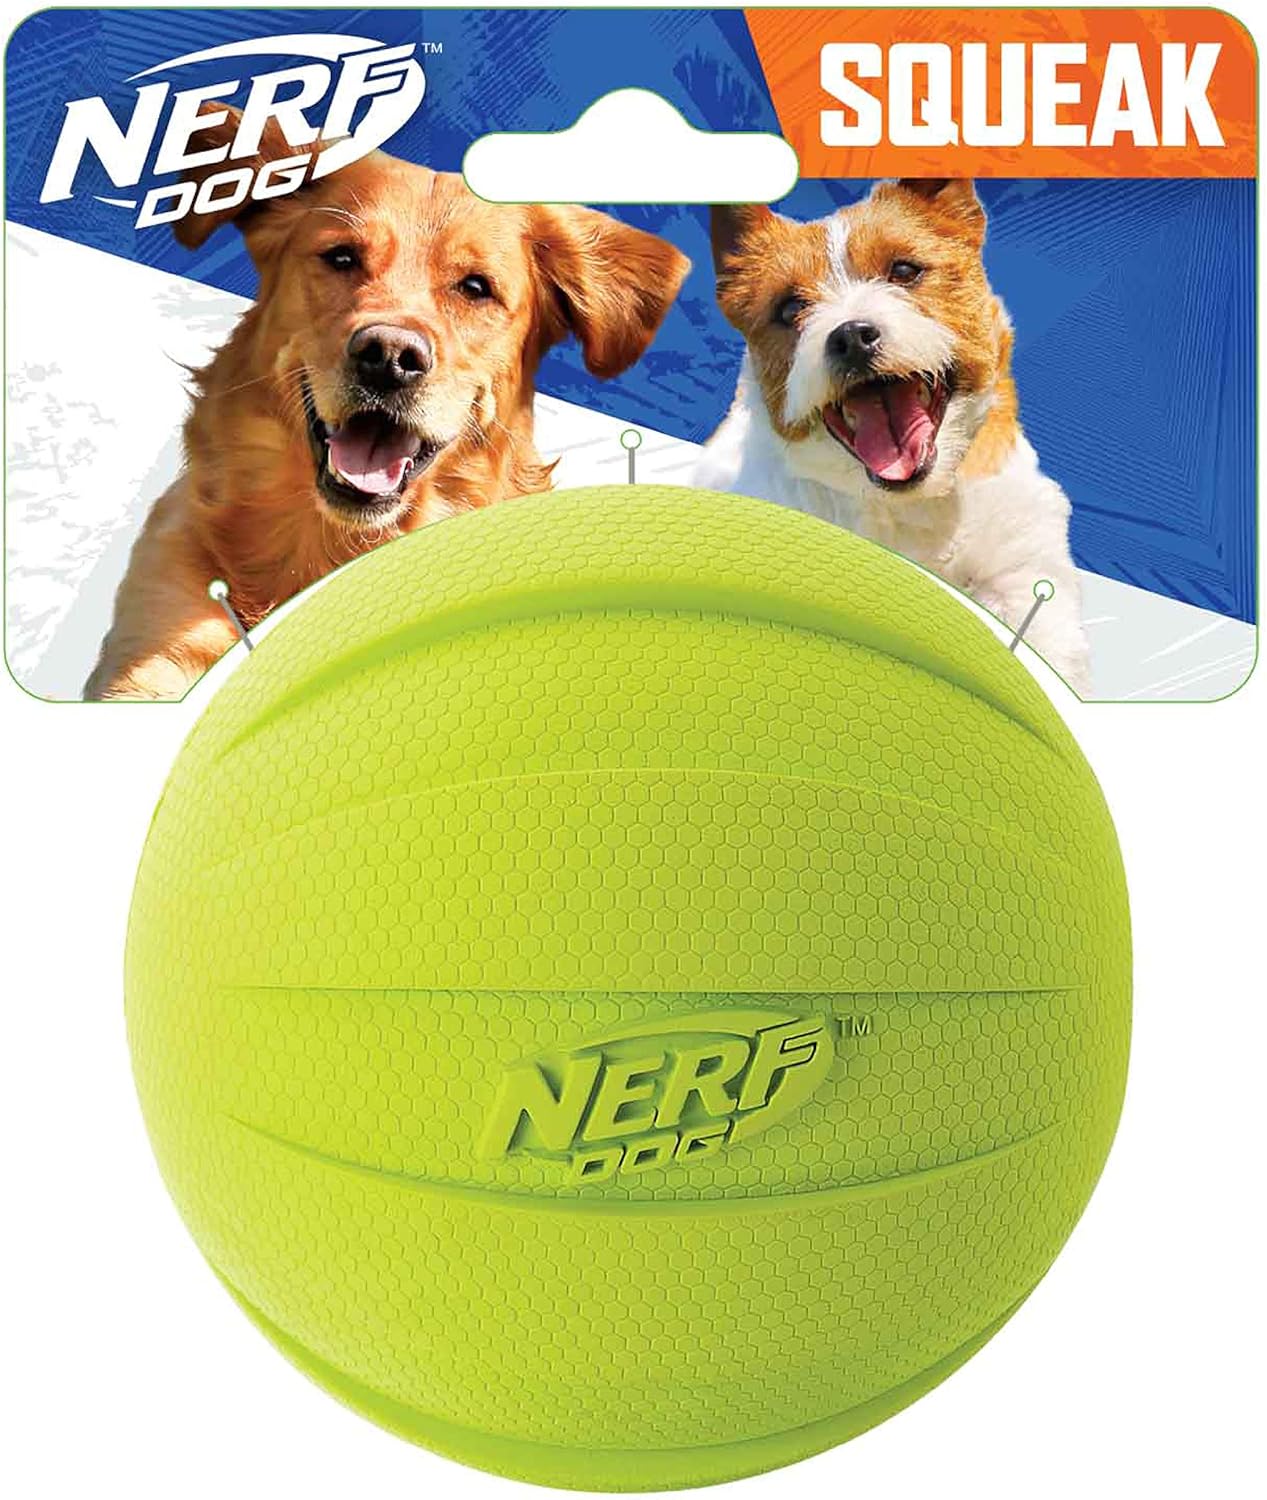 everything about this ball was good. Material is durable and sturdy, yet soft enough for the dog to bite on and grip with his mouth. Squeaks, another big advantage. But his ball is a little to big for a Jack Russel type of dog. Size is more compatible with larger dog breads, Labs, Sheppards, etc. My JR can carry it back to me, but looks a little to big and not very comfortable in his mouth. I'm seeking for same but smaller in diameter.